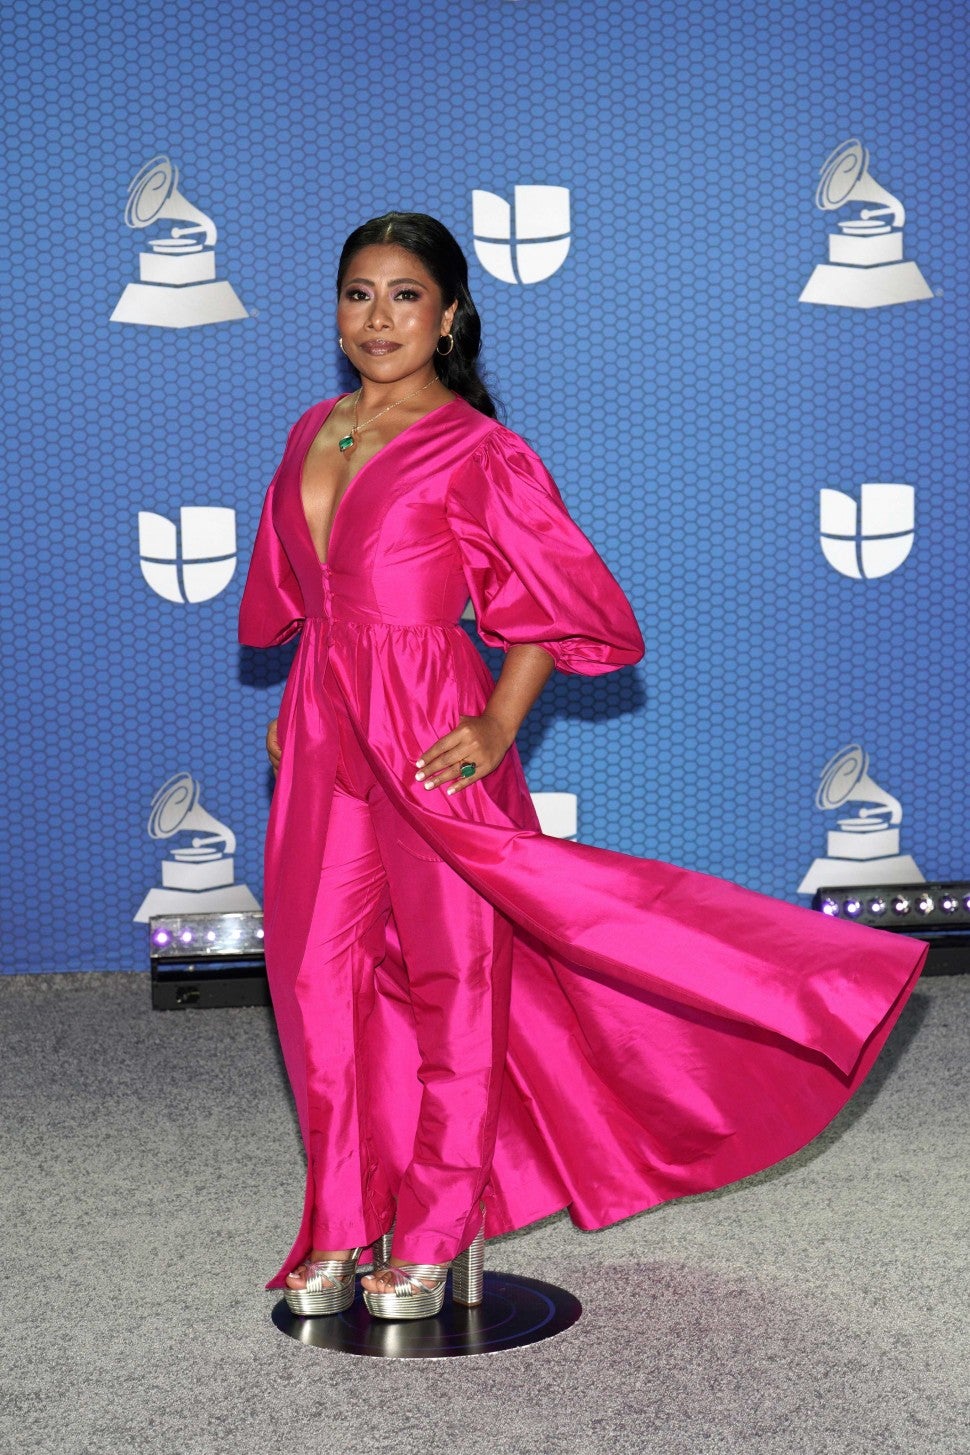 Co-host Yalitza Aparicio attends The 21st Annual Latin GRAMMY Awards at American Airlines Arena on November 19, 2020 in Miami, Florida.